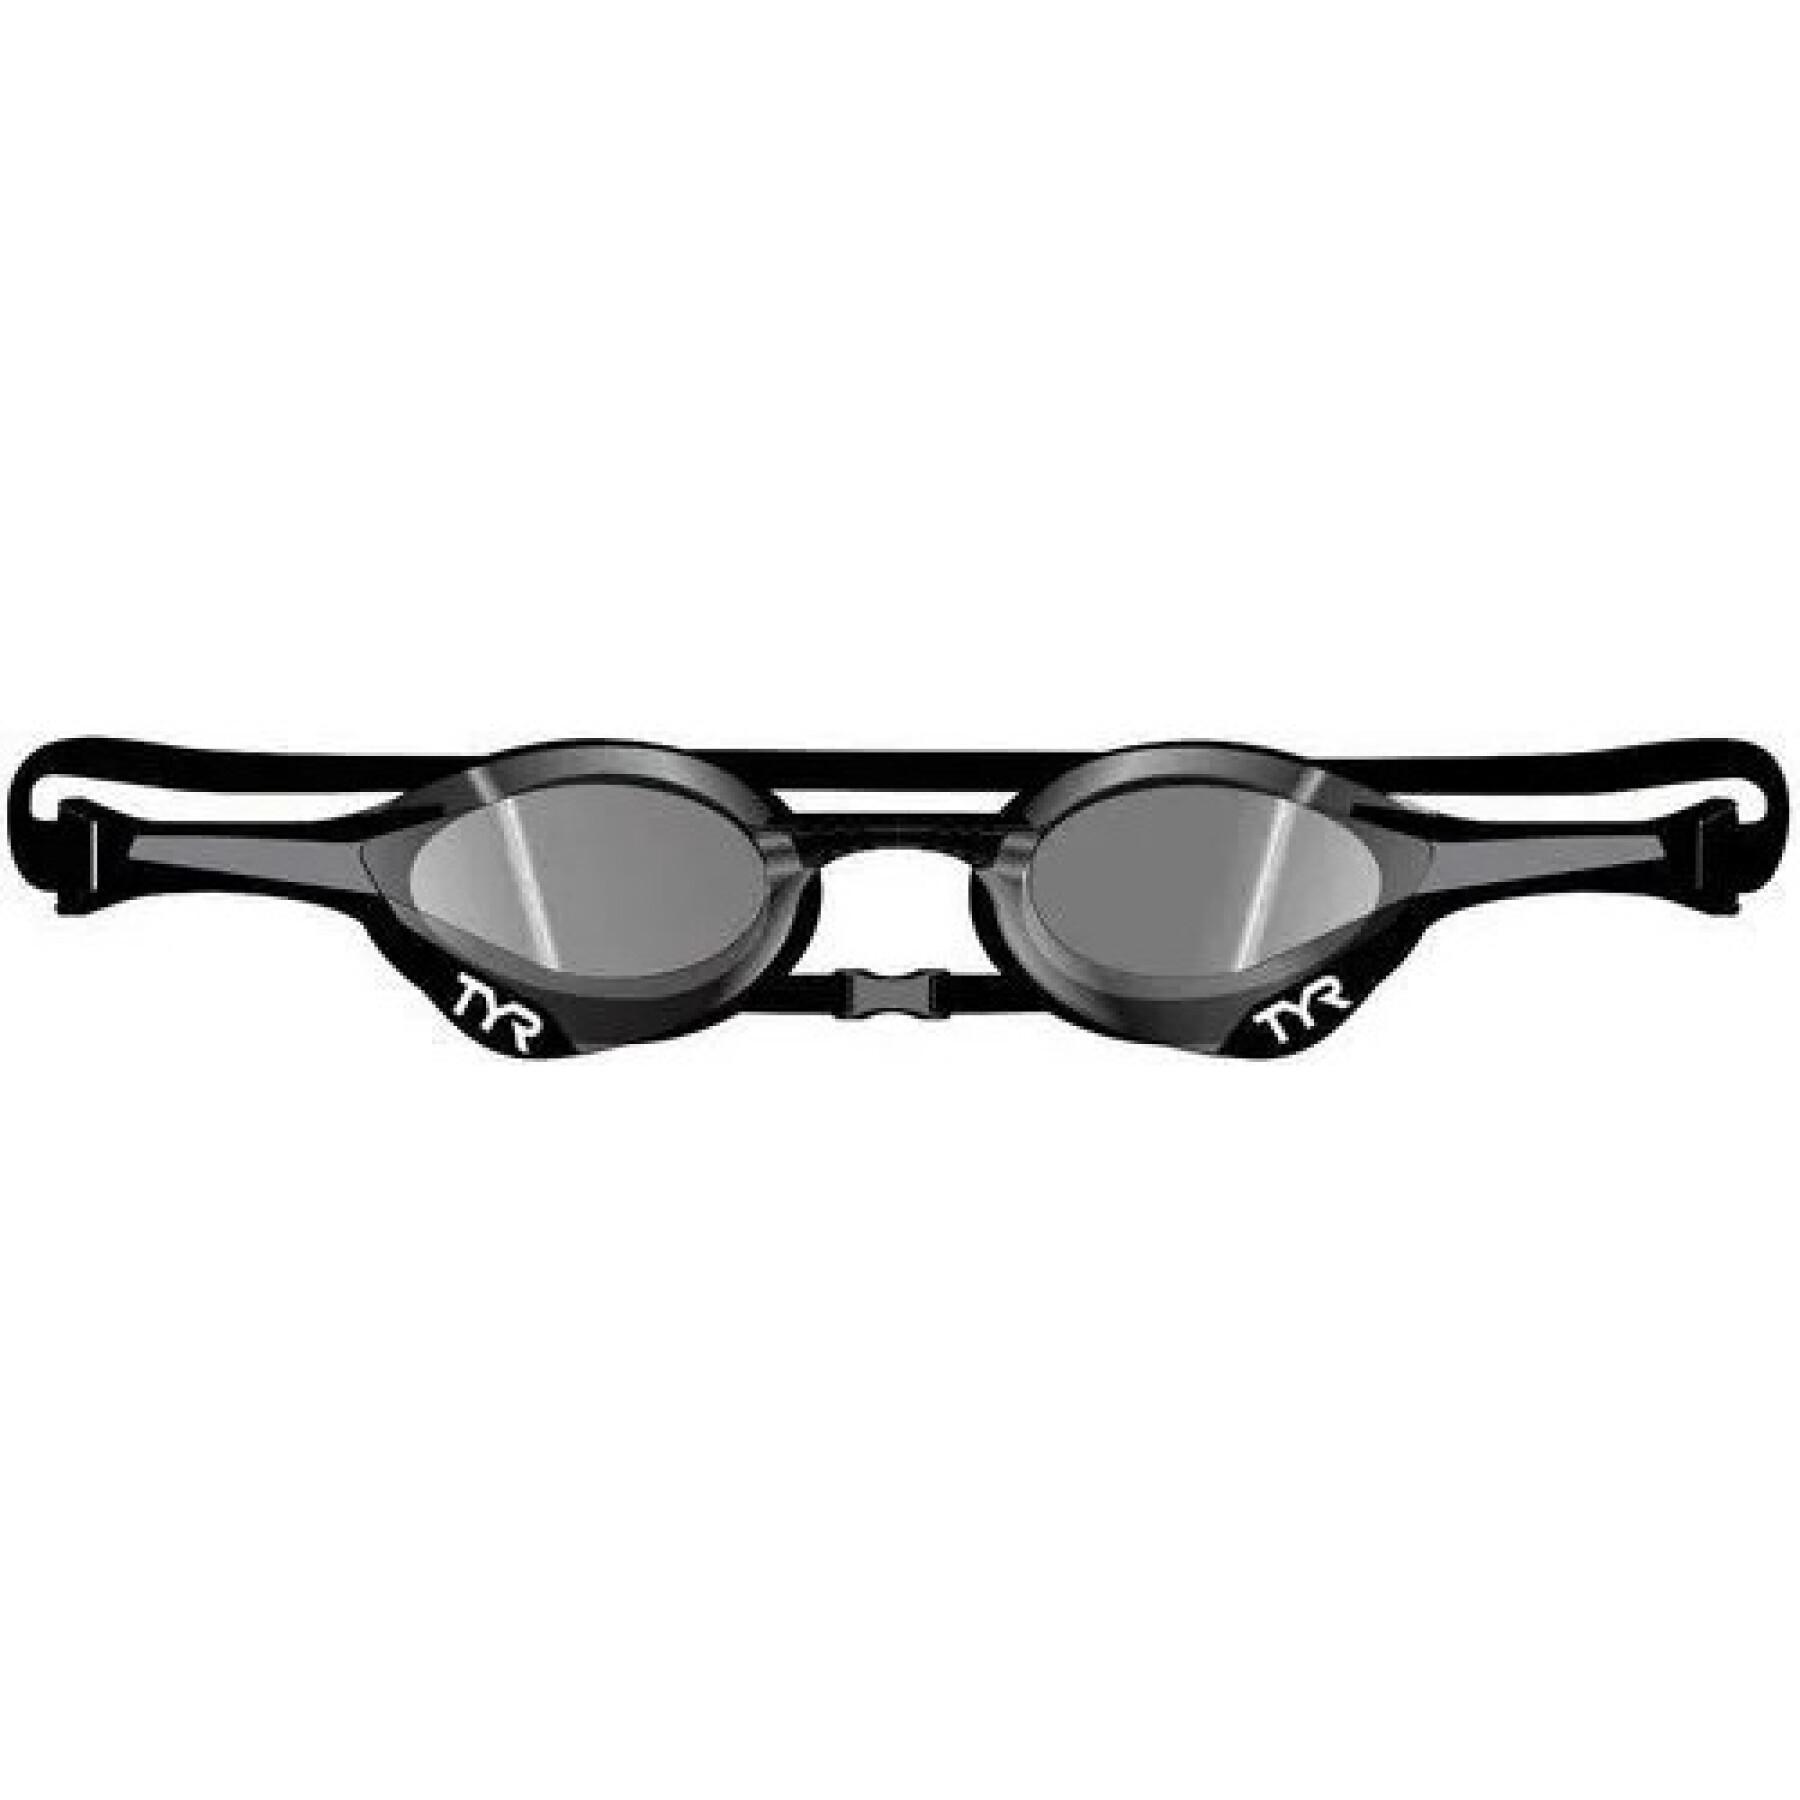 Lunettes de natation TYR tracer-x elite mirrored racing goggles